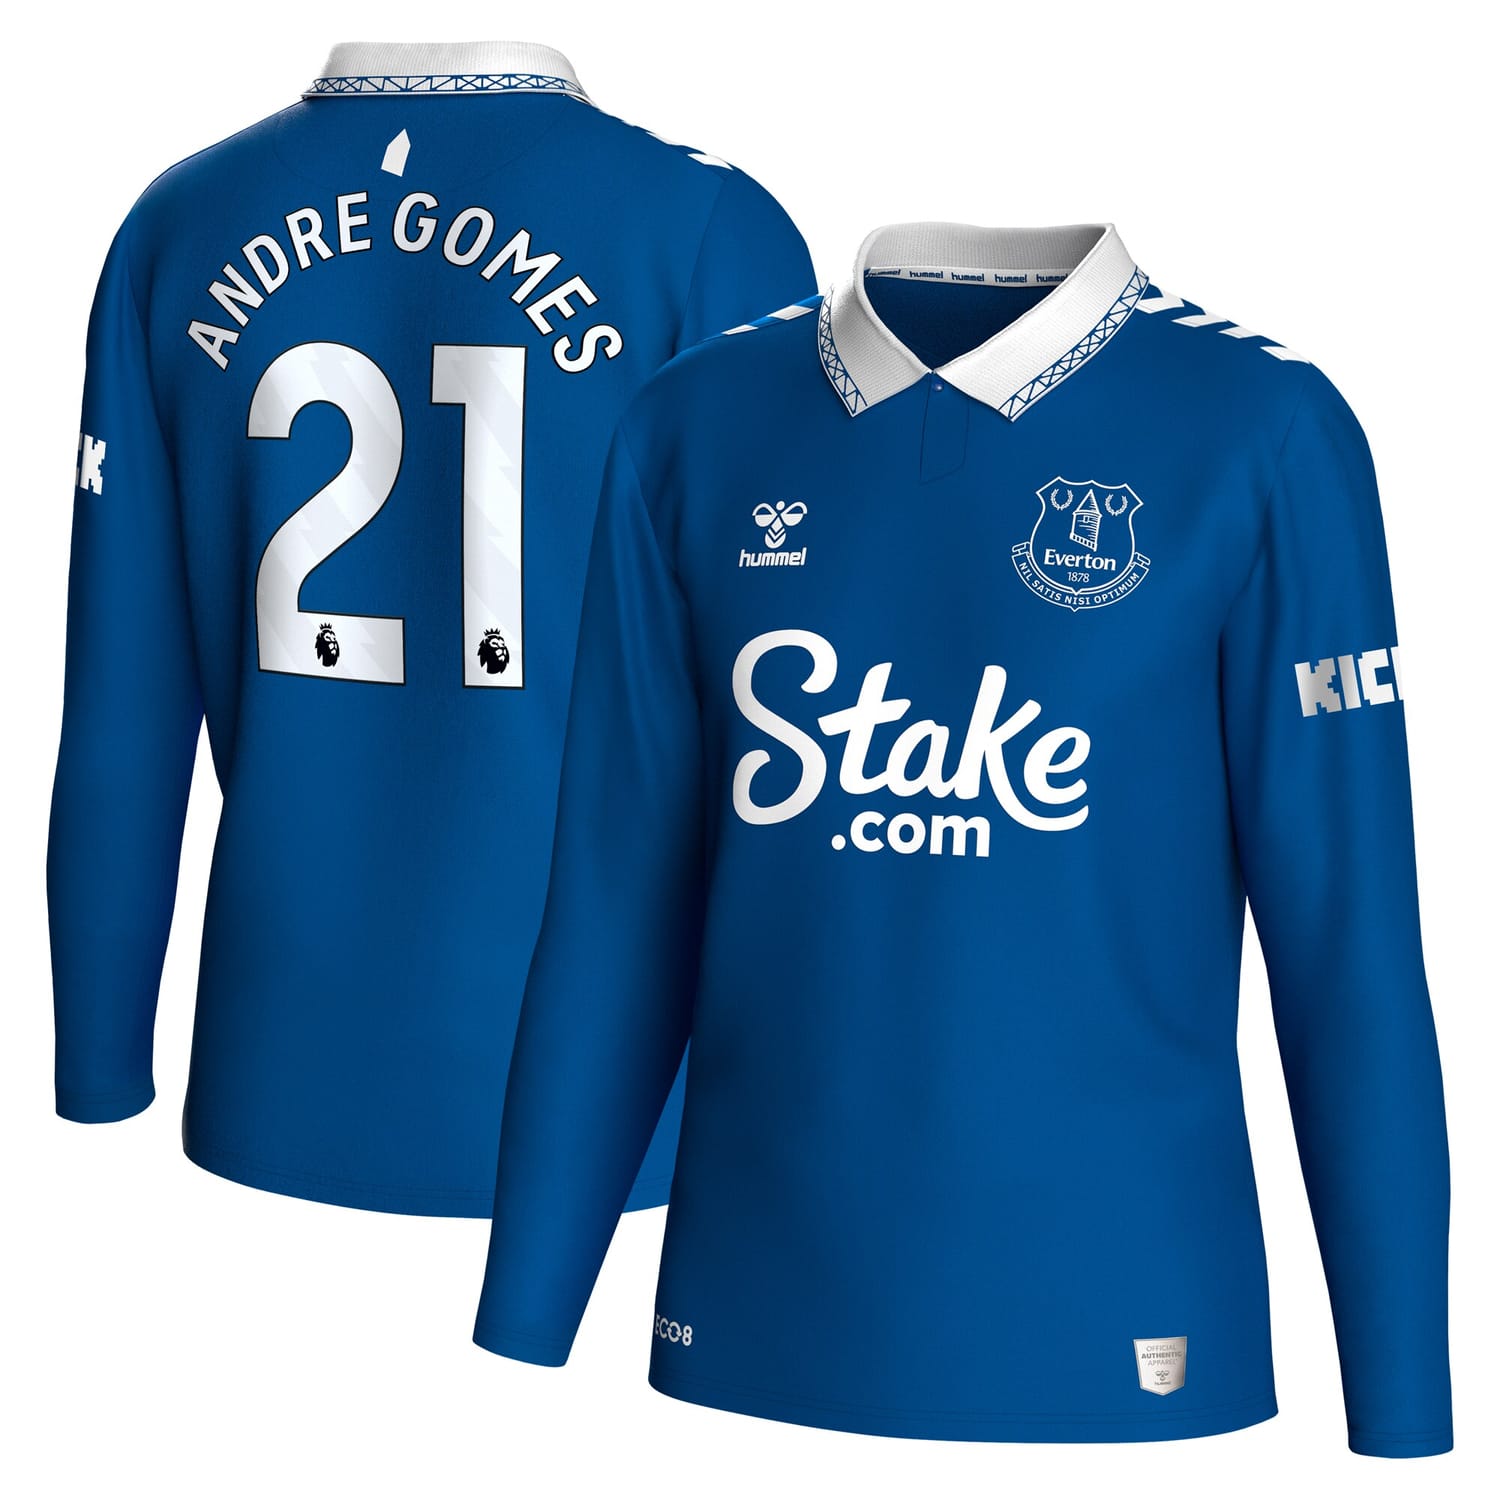 Premier League Everton Home Jersey Shirt Long Sleeve 2023-24 player Andre Gomes 21 printing for Men